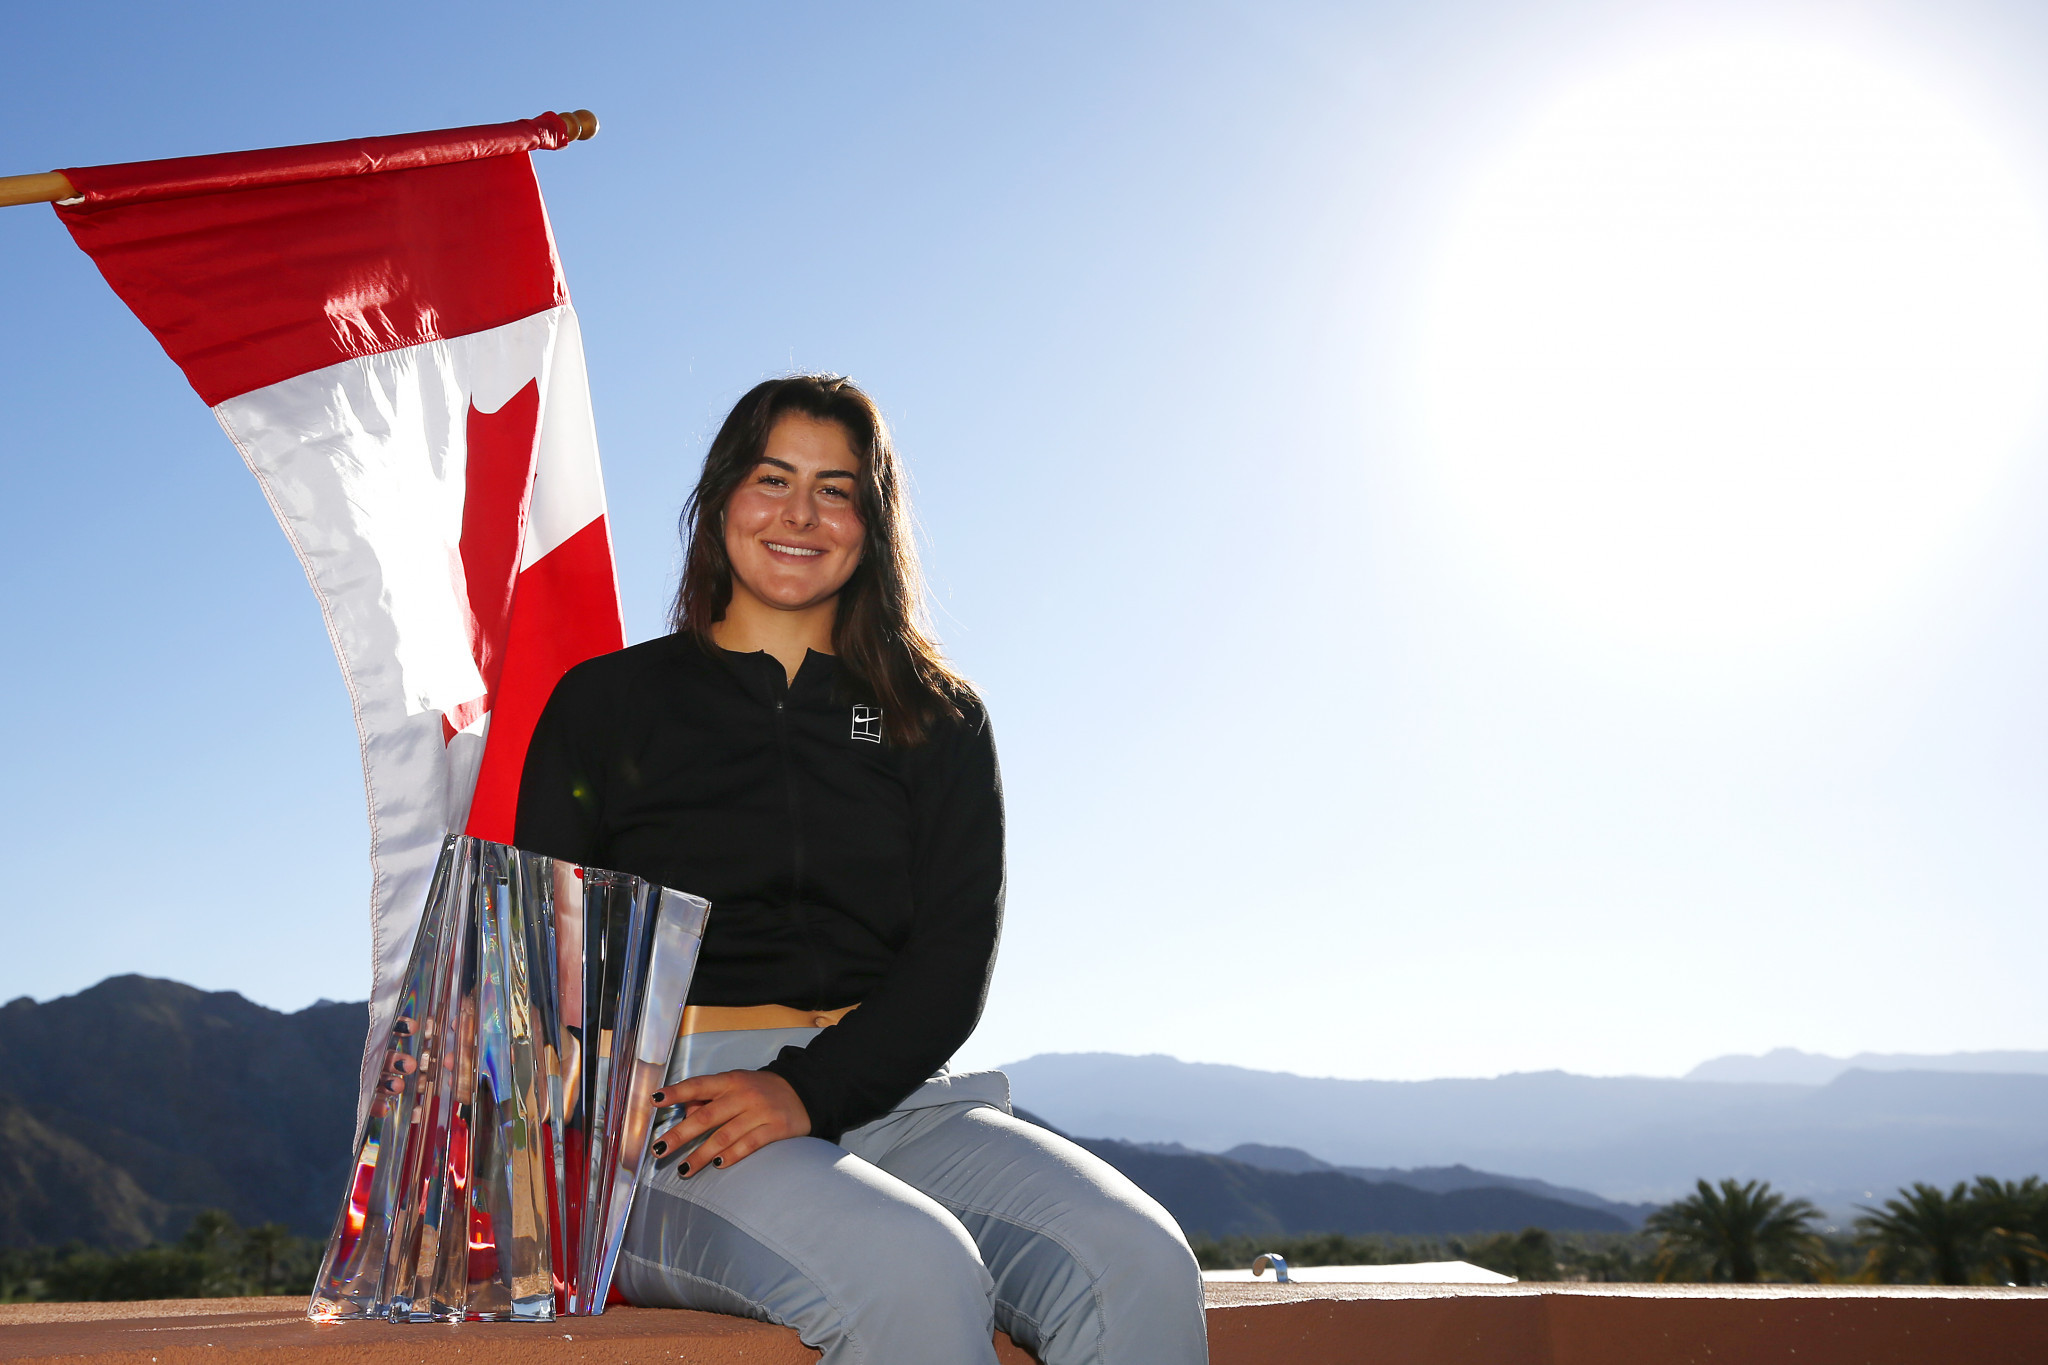 Canada's Bianca Andreescu won the women's Indian Wells Masters title the last time the event was played in 2019 ©Getty Images